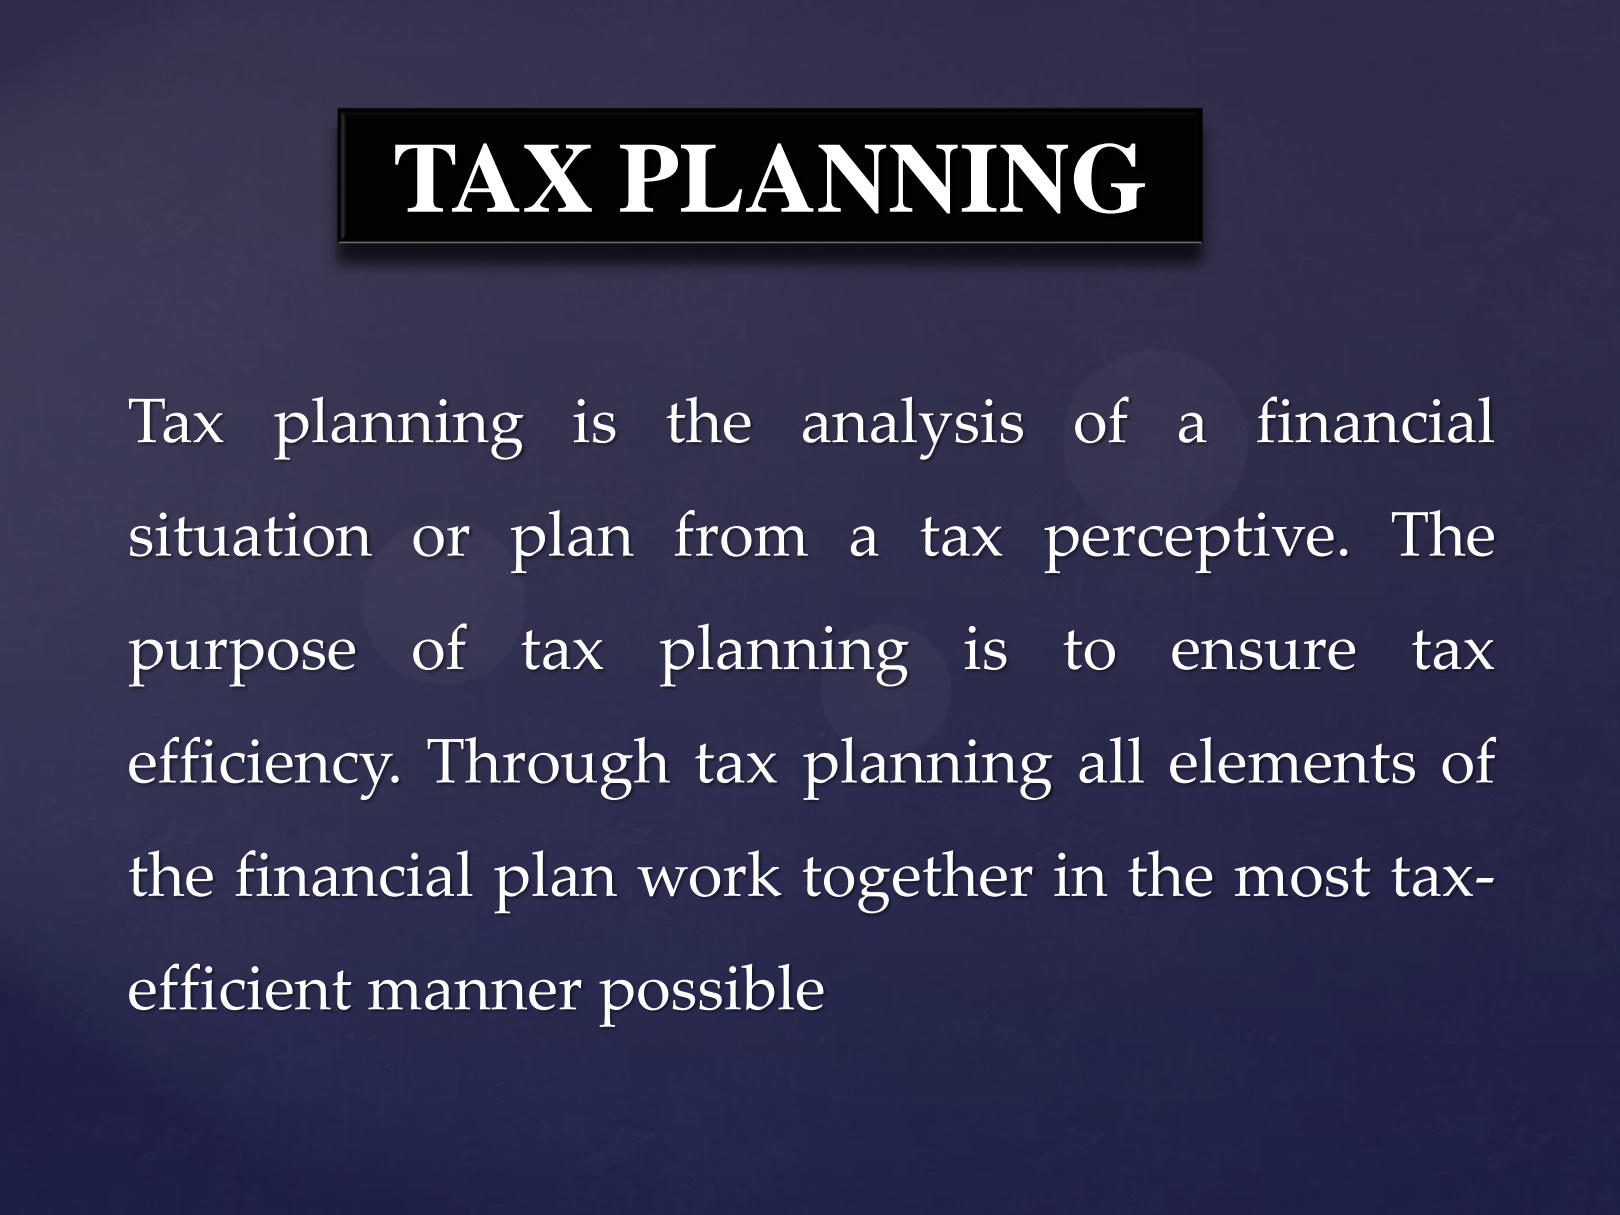 What Does Tax Planning Mean?